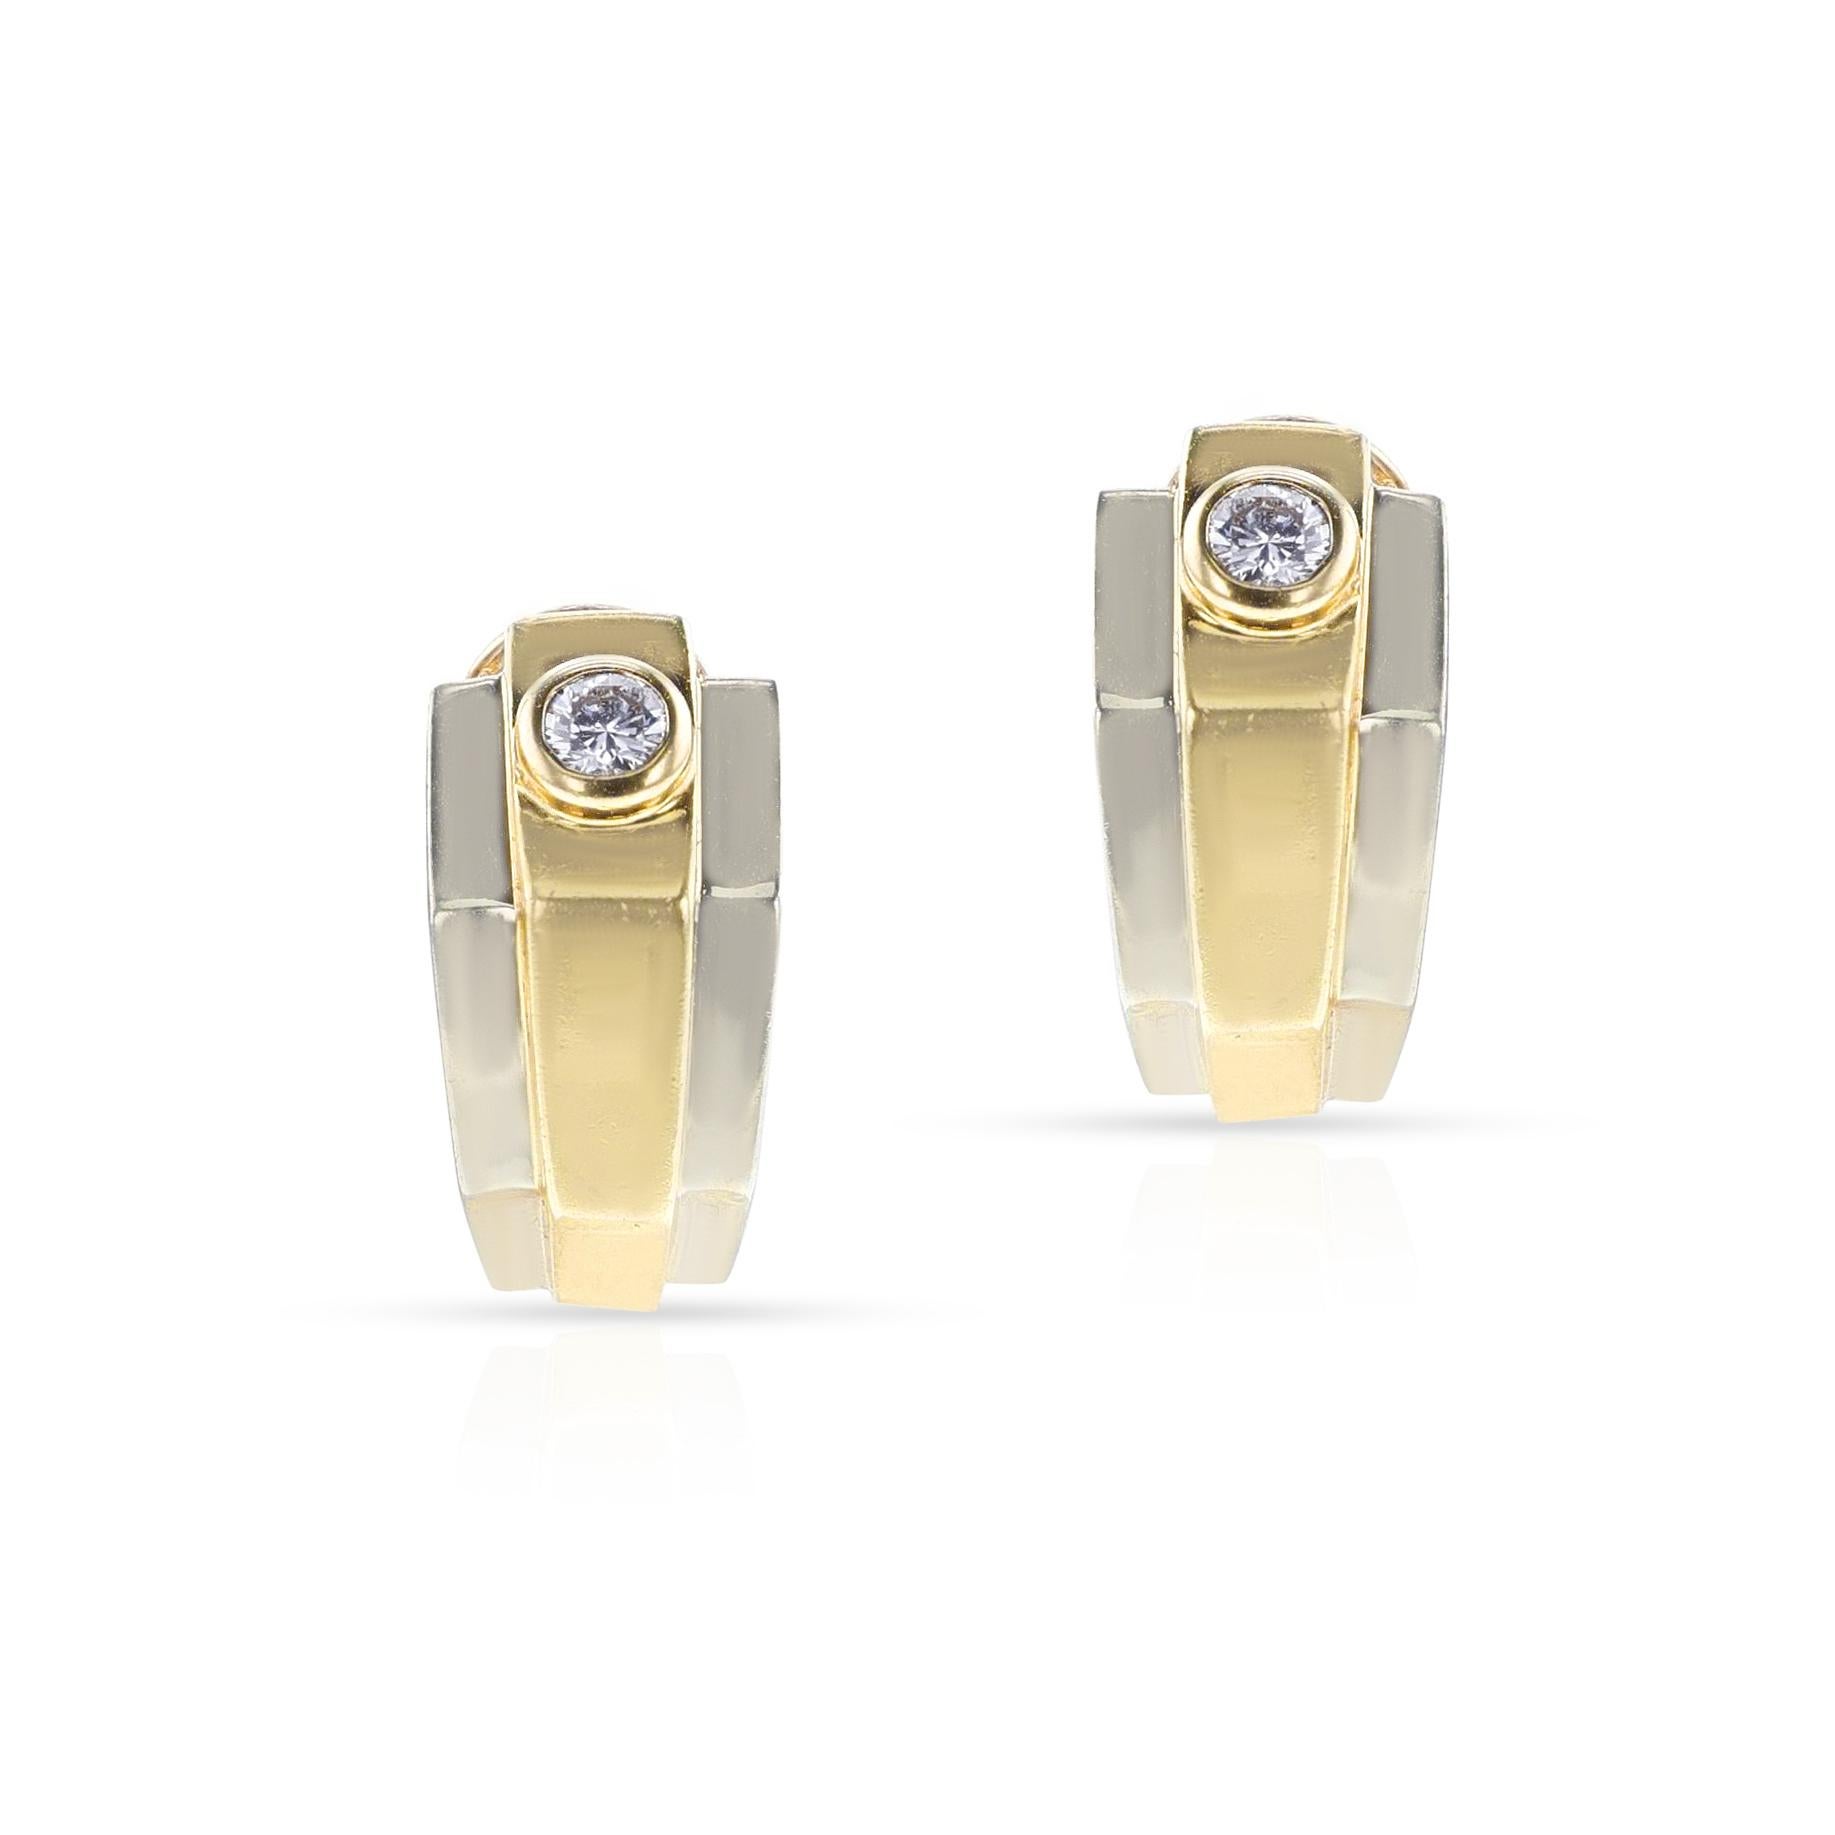 Hermes Paris Diamond and Two-Tone Gold Earrings made in 18k Gold. The length is 2/3 inches. French, Makers Mark. 

SKU: 1487-BCJARTU